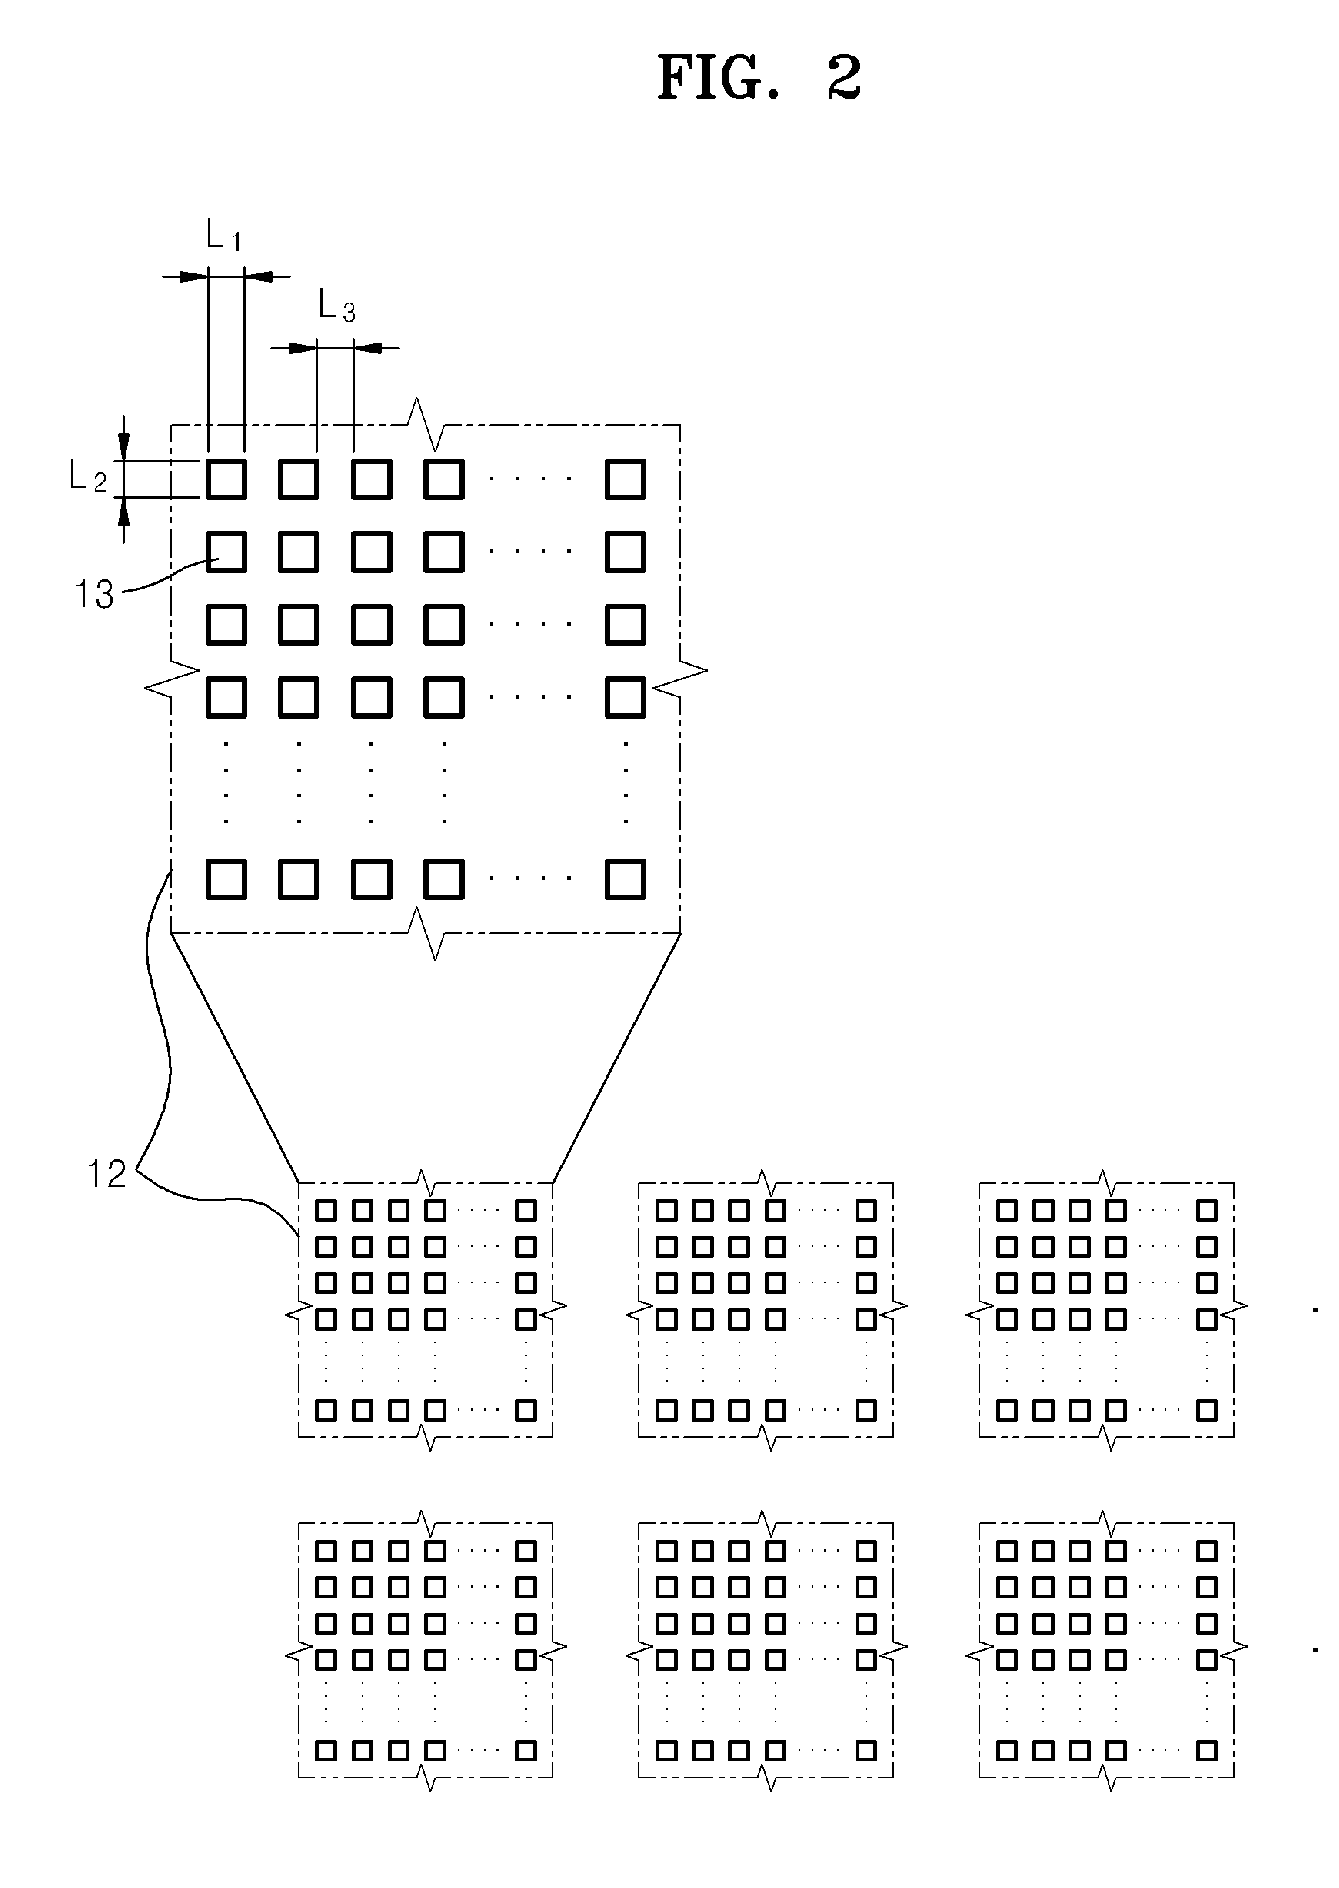 Substrate for biochip and method of manufacturing the substrate